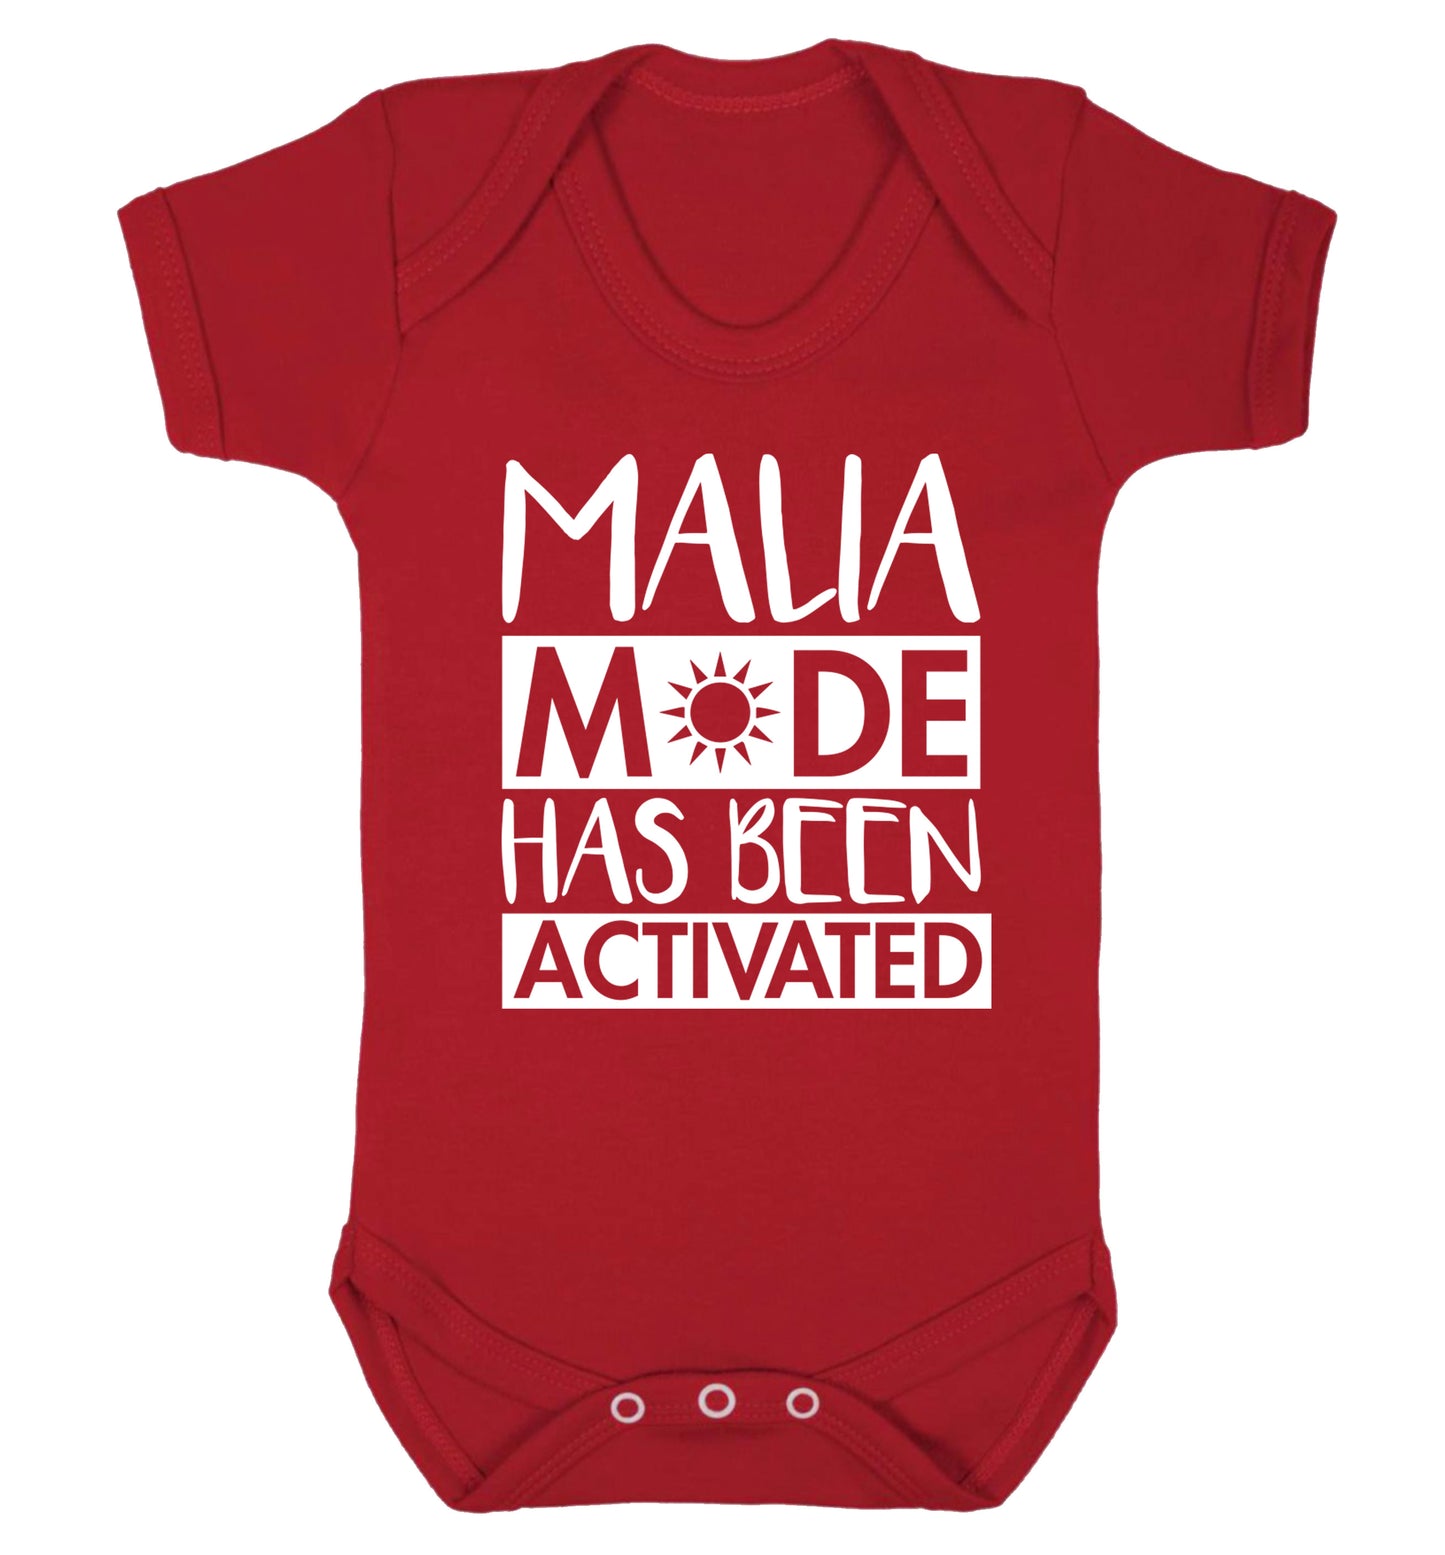 Malia mode has been activated Baby Vest red 18-24 months